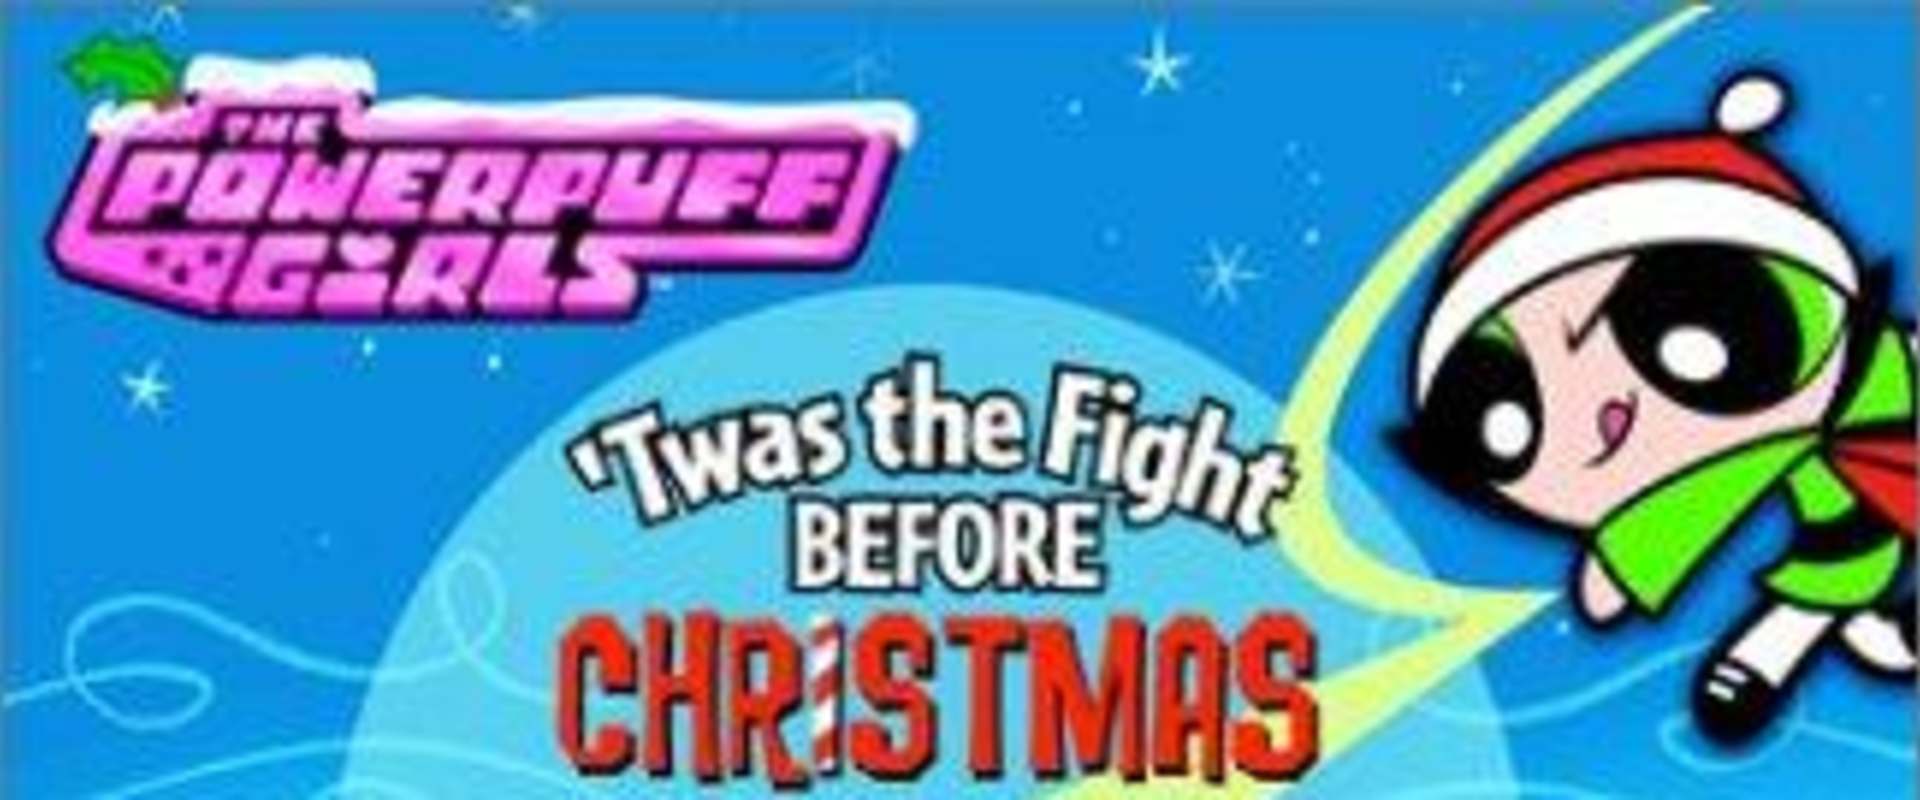 The Powerpuff Girls: 'Twas the Fight Before Christmas background 2